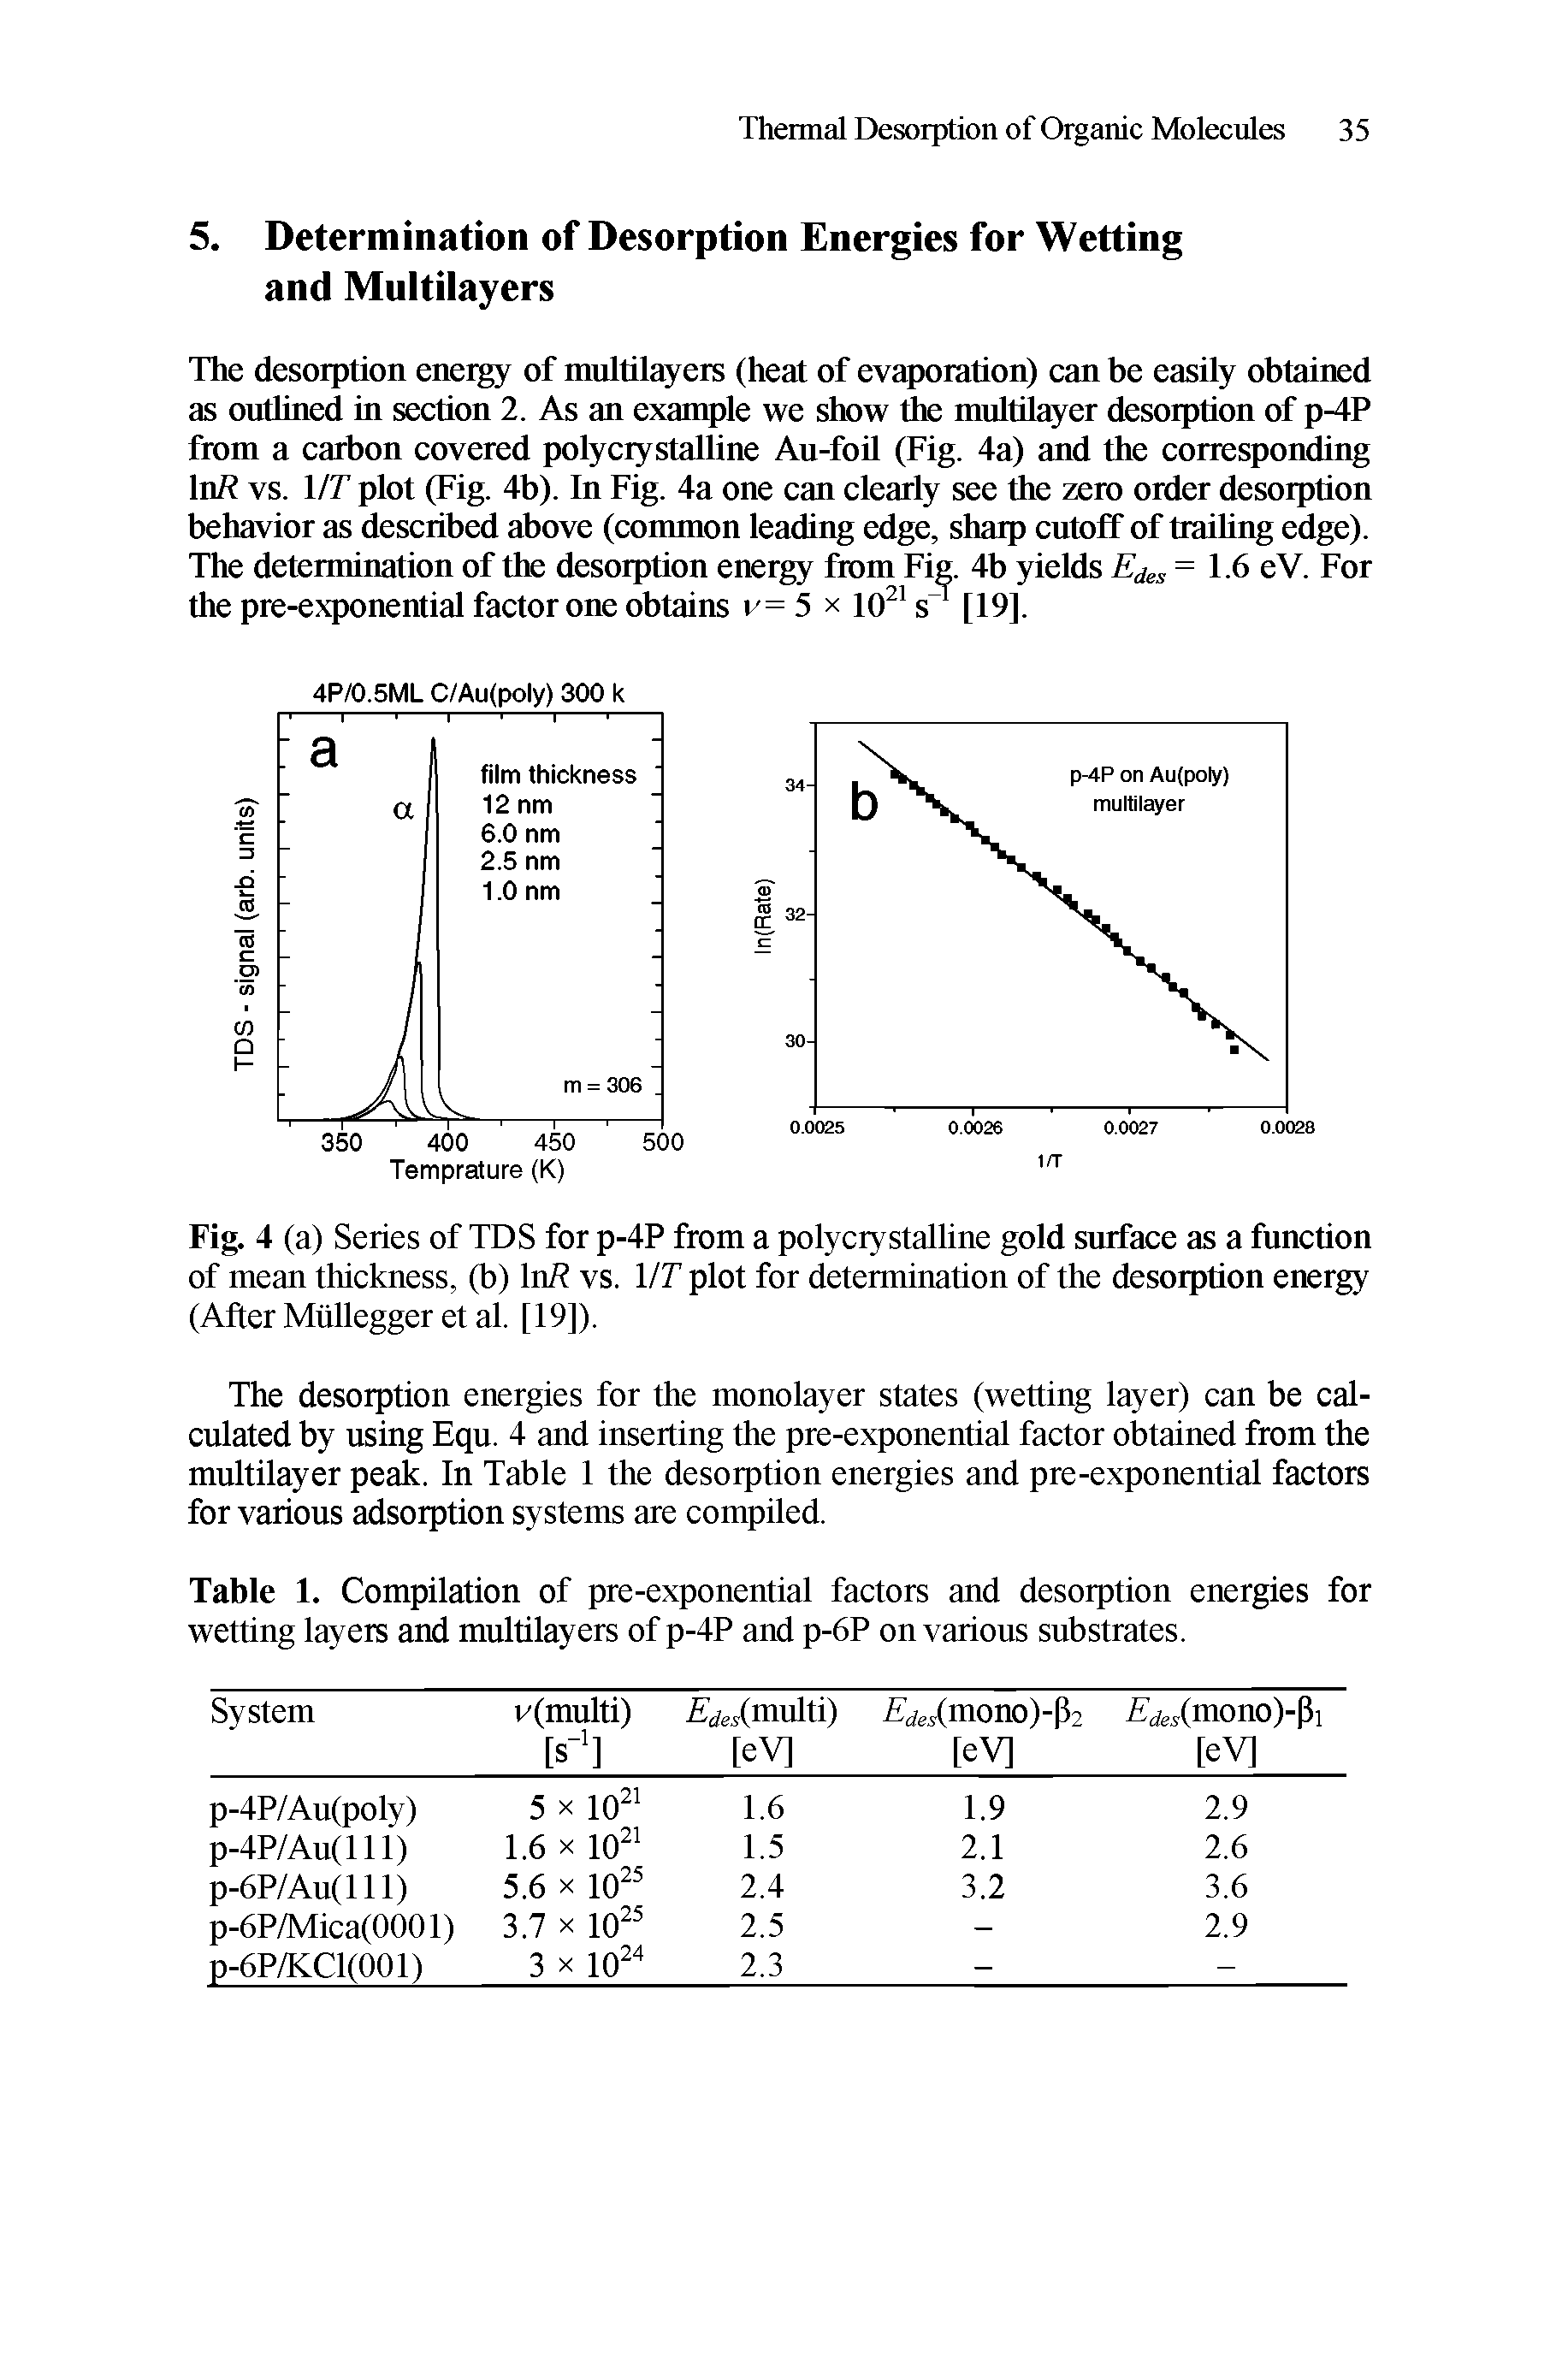 Table 1. Compilation of pre-exponential factors and desorption energies for wetting layers and multilayers of p-4P and p-6P on various substrates.